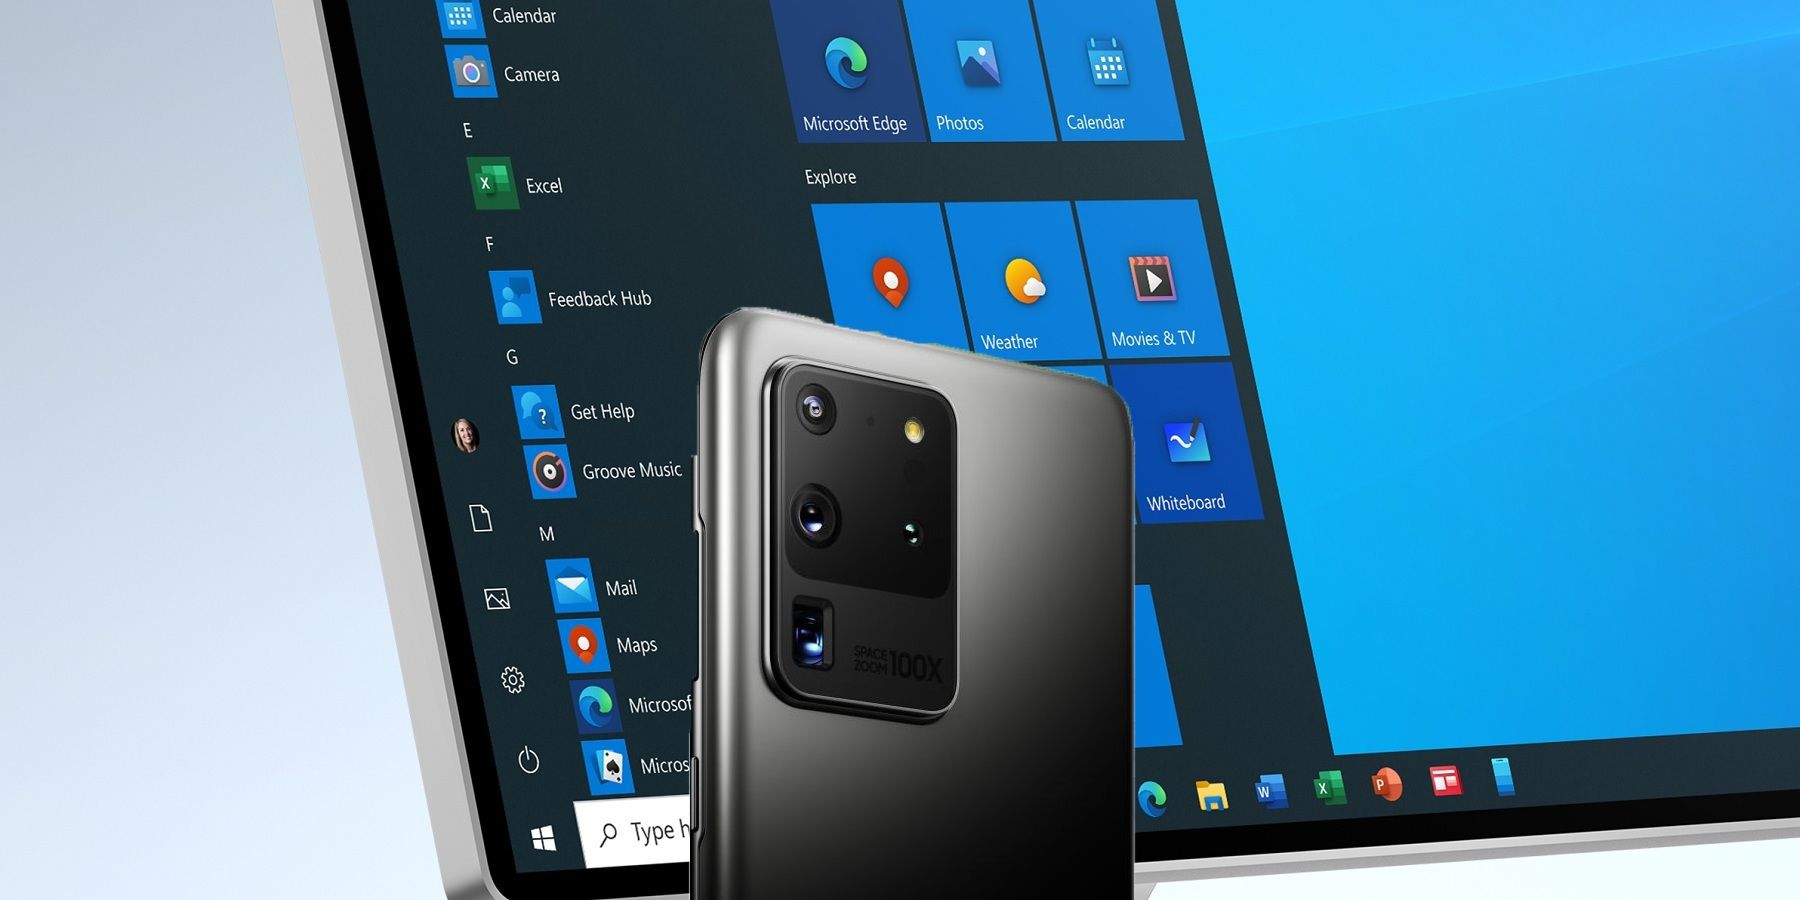 How To Link Samsung Galaxy Phone With Windows 10 For Easy Multitasking